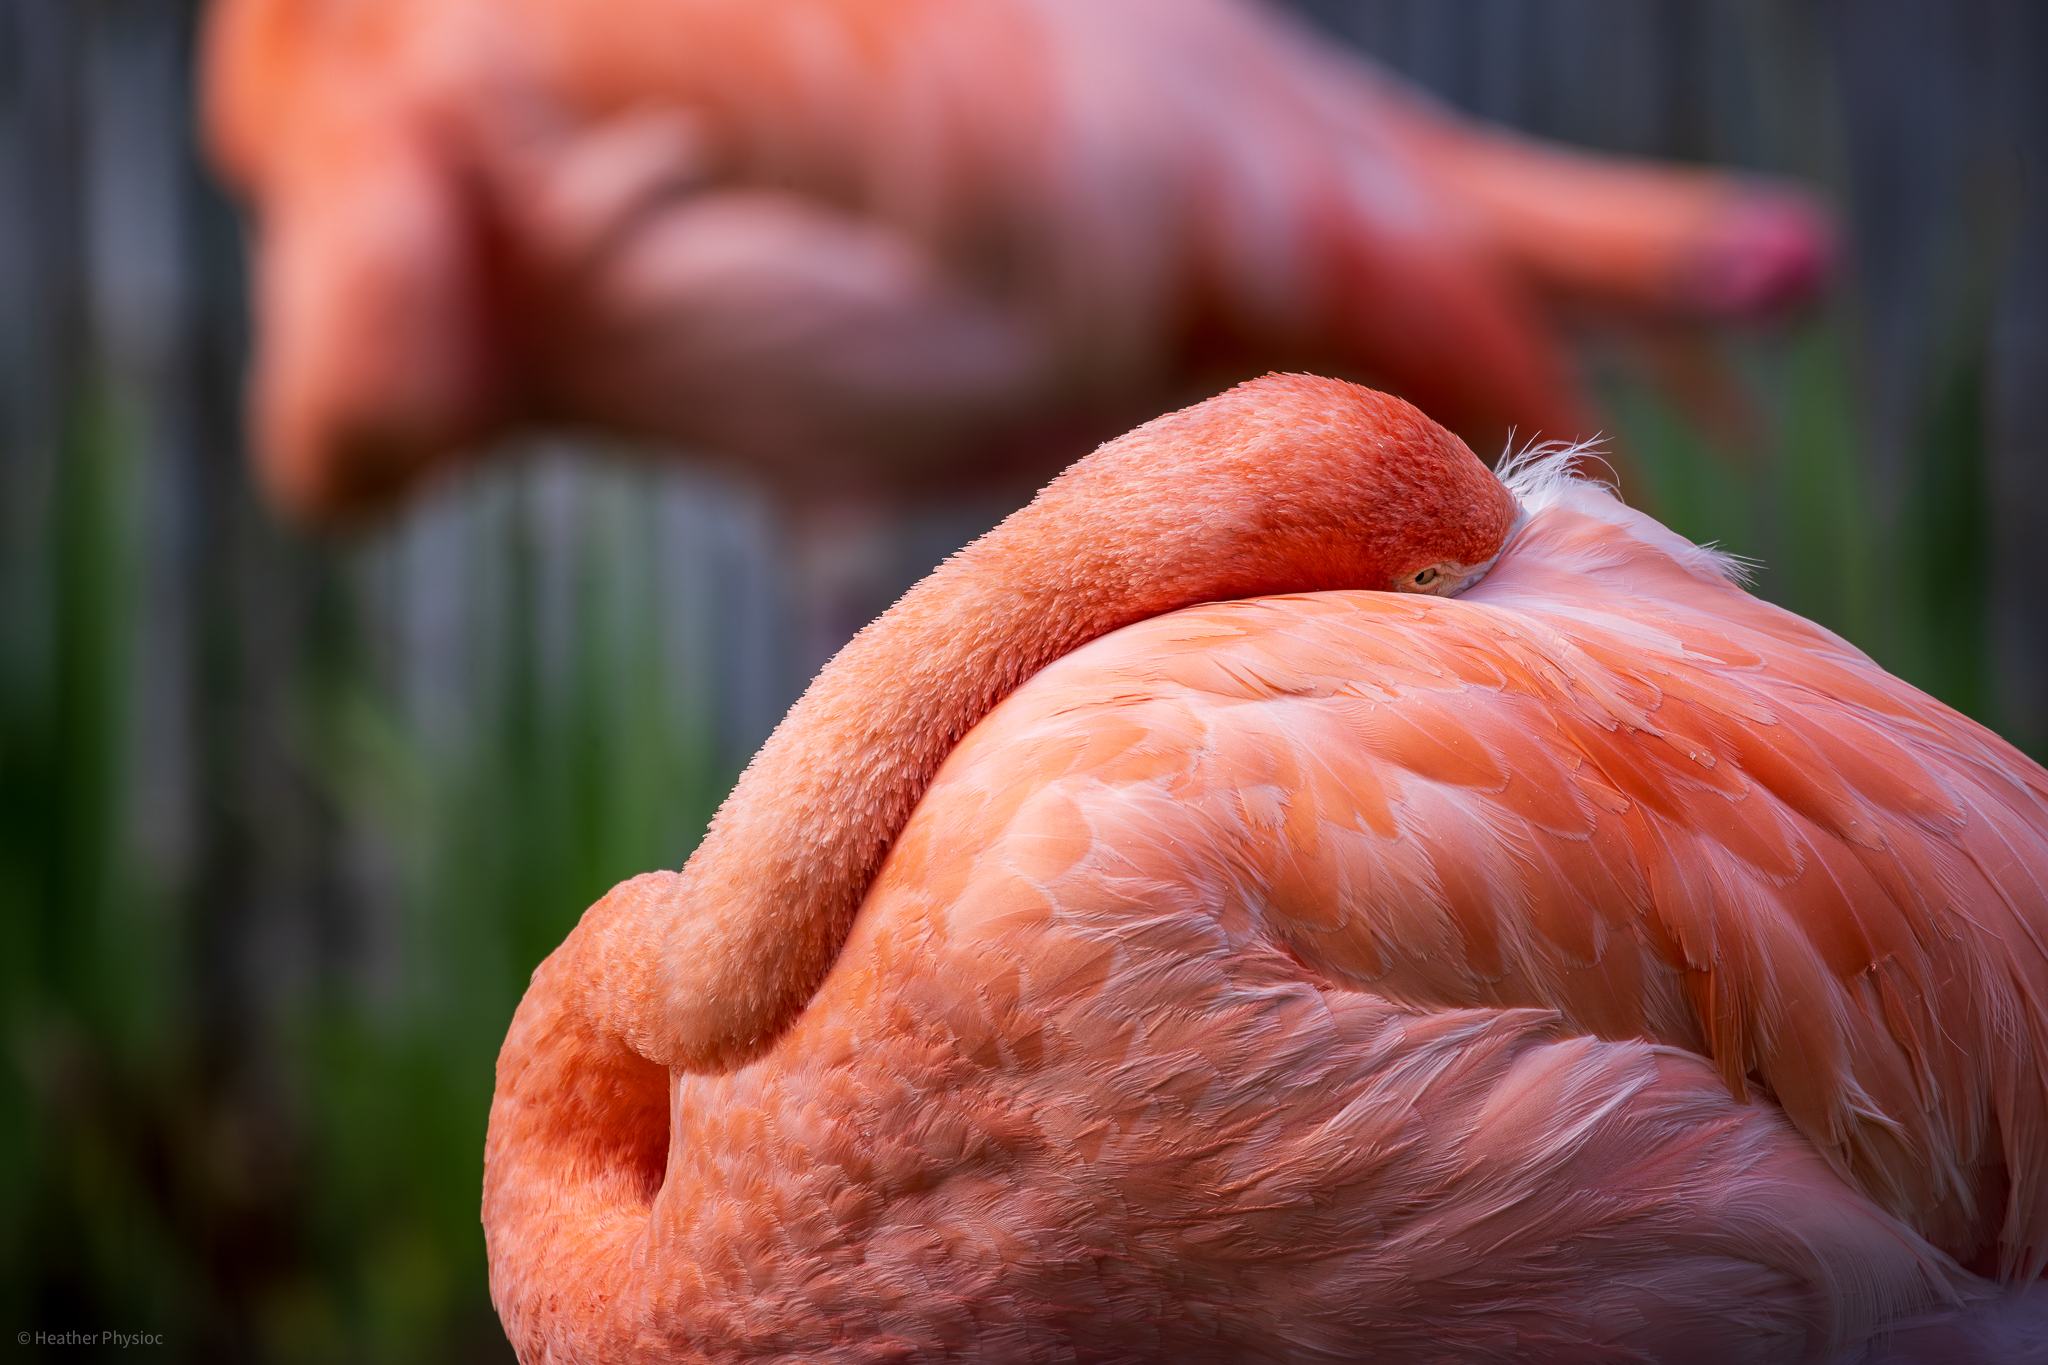 Pair of sleeping pink flamingos, symmetry and shallow depth of field